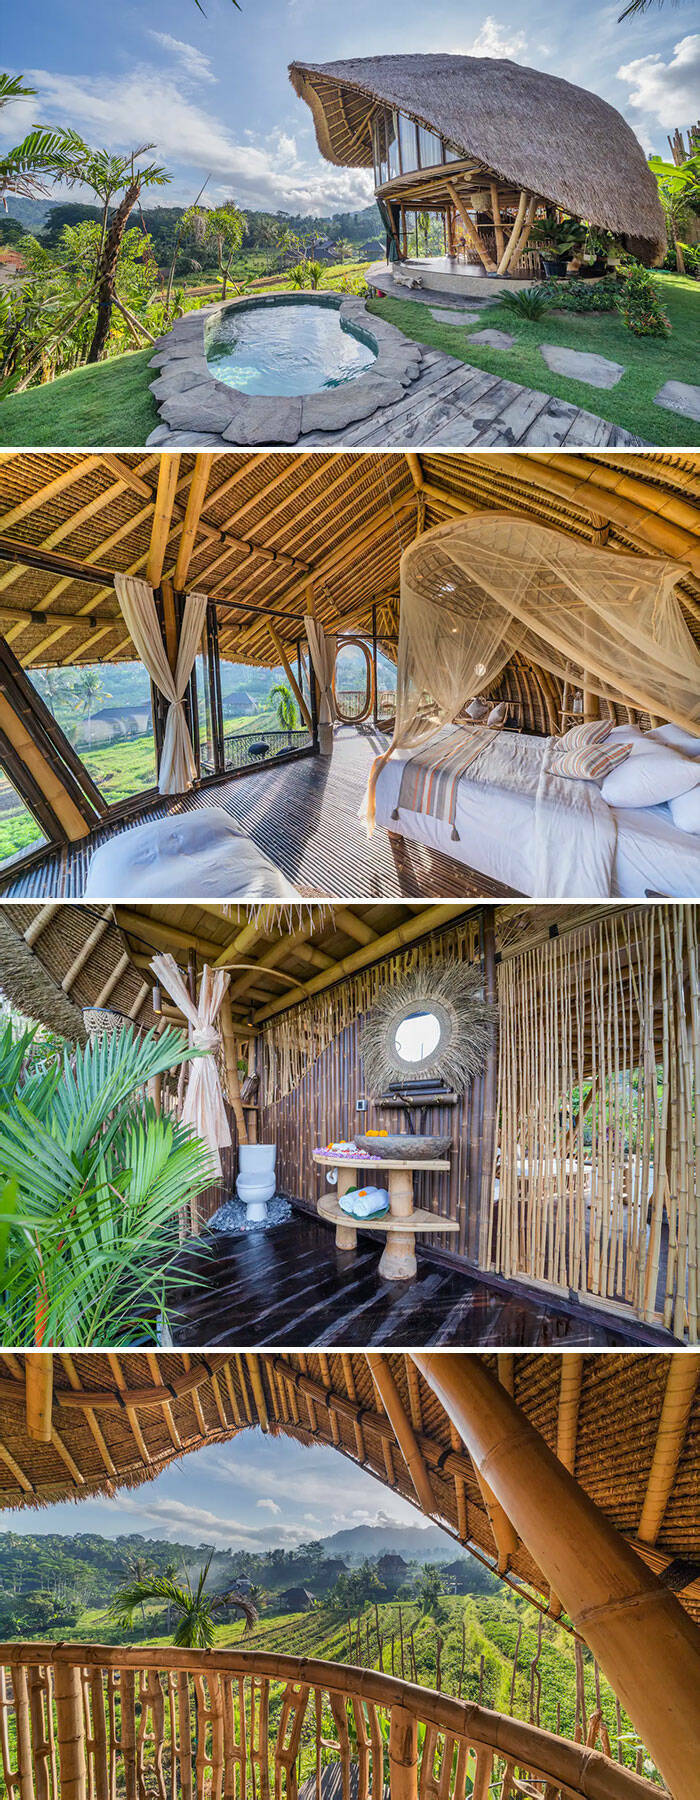 Unique Airbnb Stays That Will Make Your Trip Unforgettable